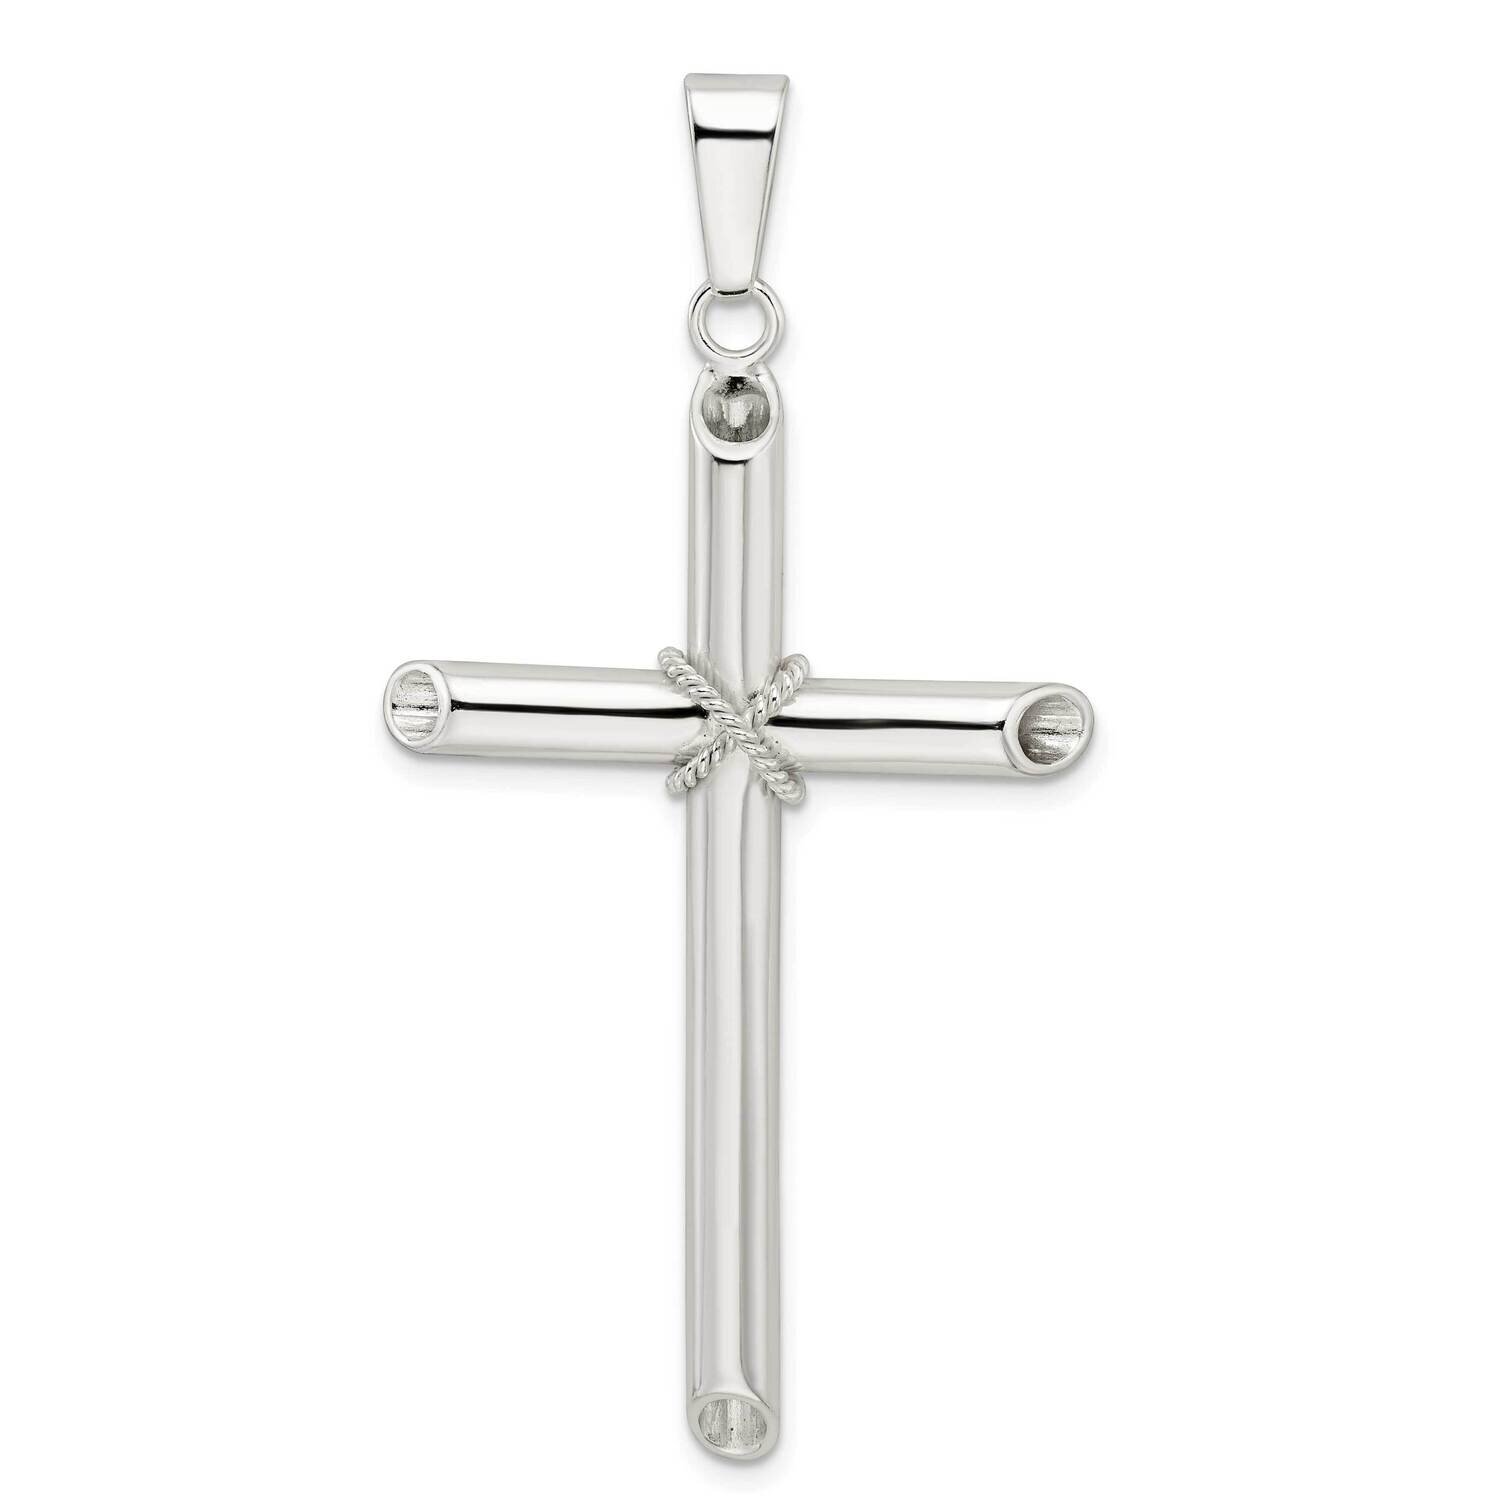 x Center Large Hollow Tube Cross Pendant Sterling Silver Polished QC11141